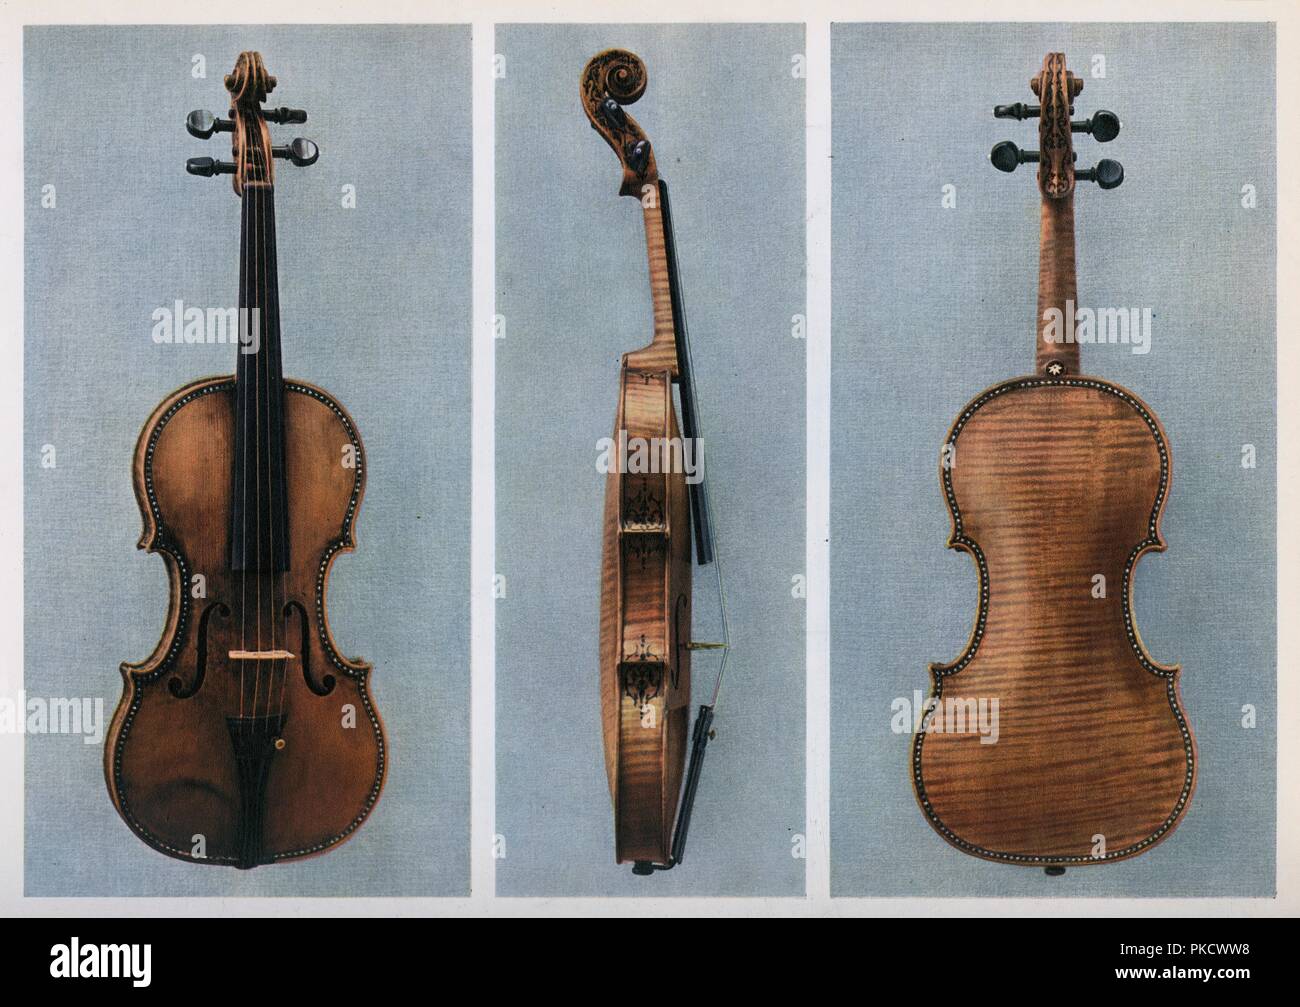 Violin By Amati High Resolution Stock Photography and Images - Alamy